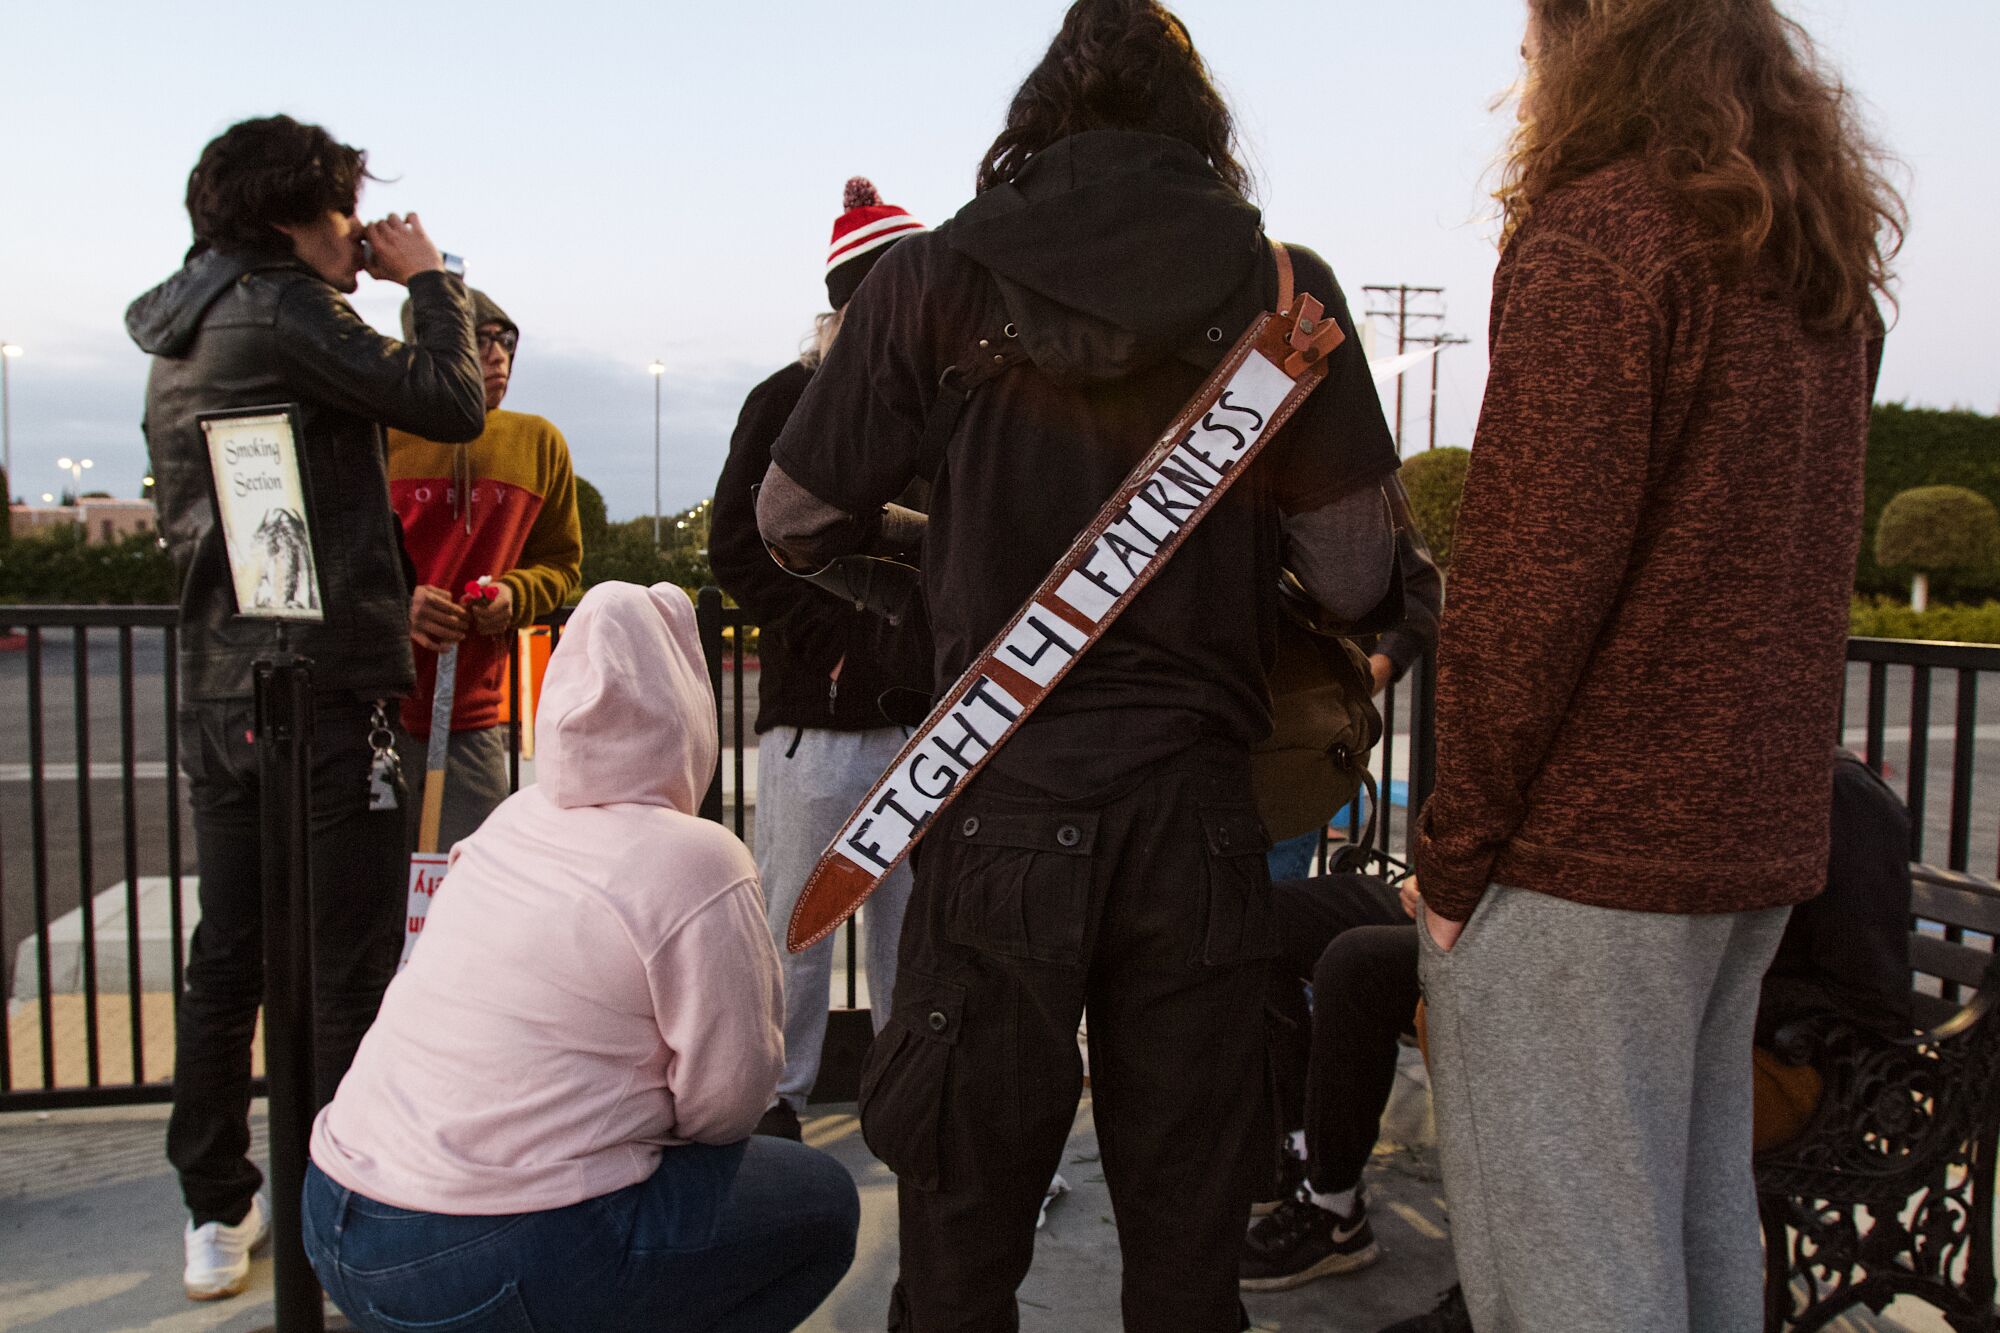 Cast members gather, backs to camera, in the parking lot. A sword sheath reads "FIGHT 4 FAIRNESS" across one's back.